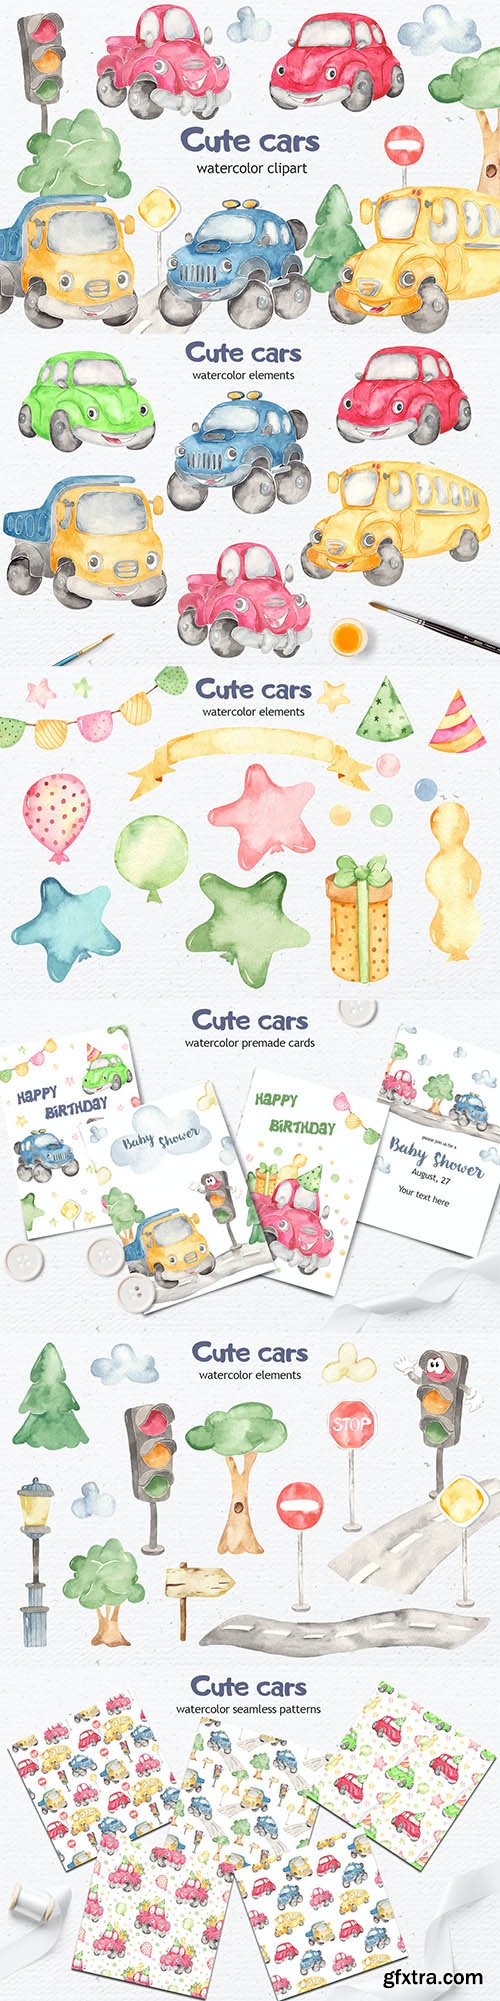 Watercolor cute Cars. Clipart, cards, patterns